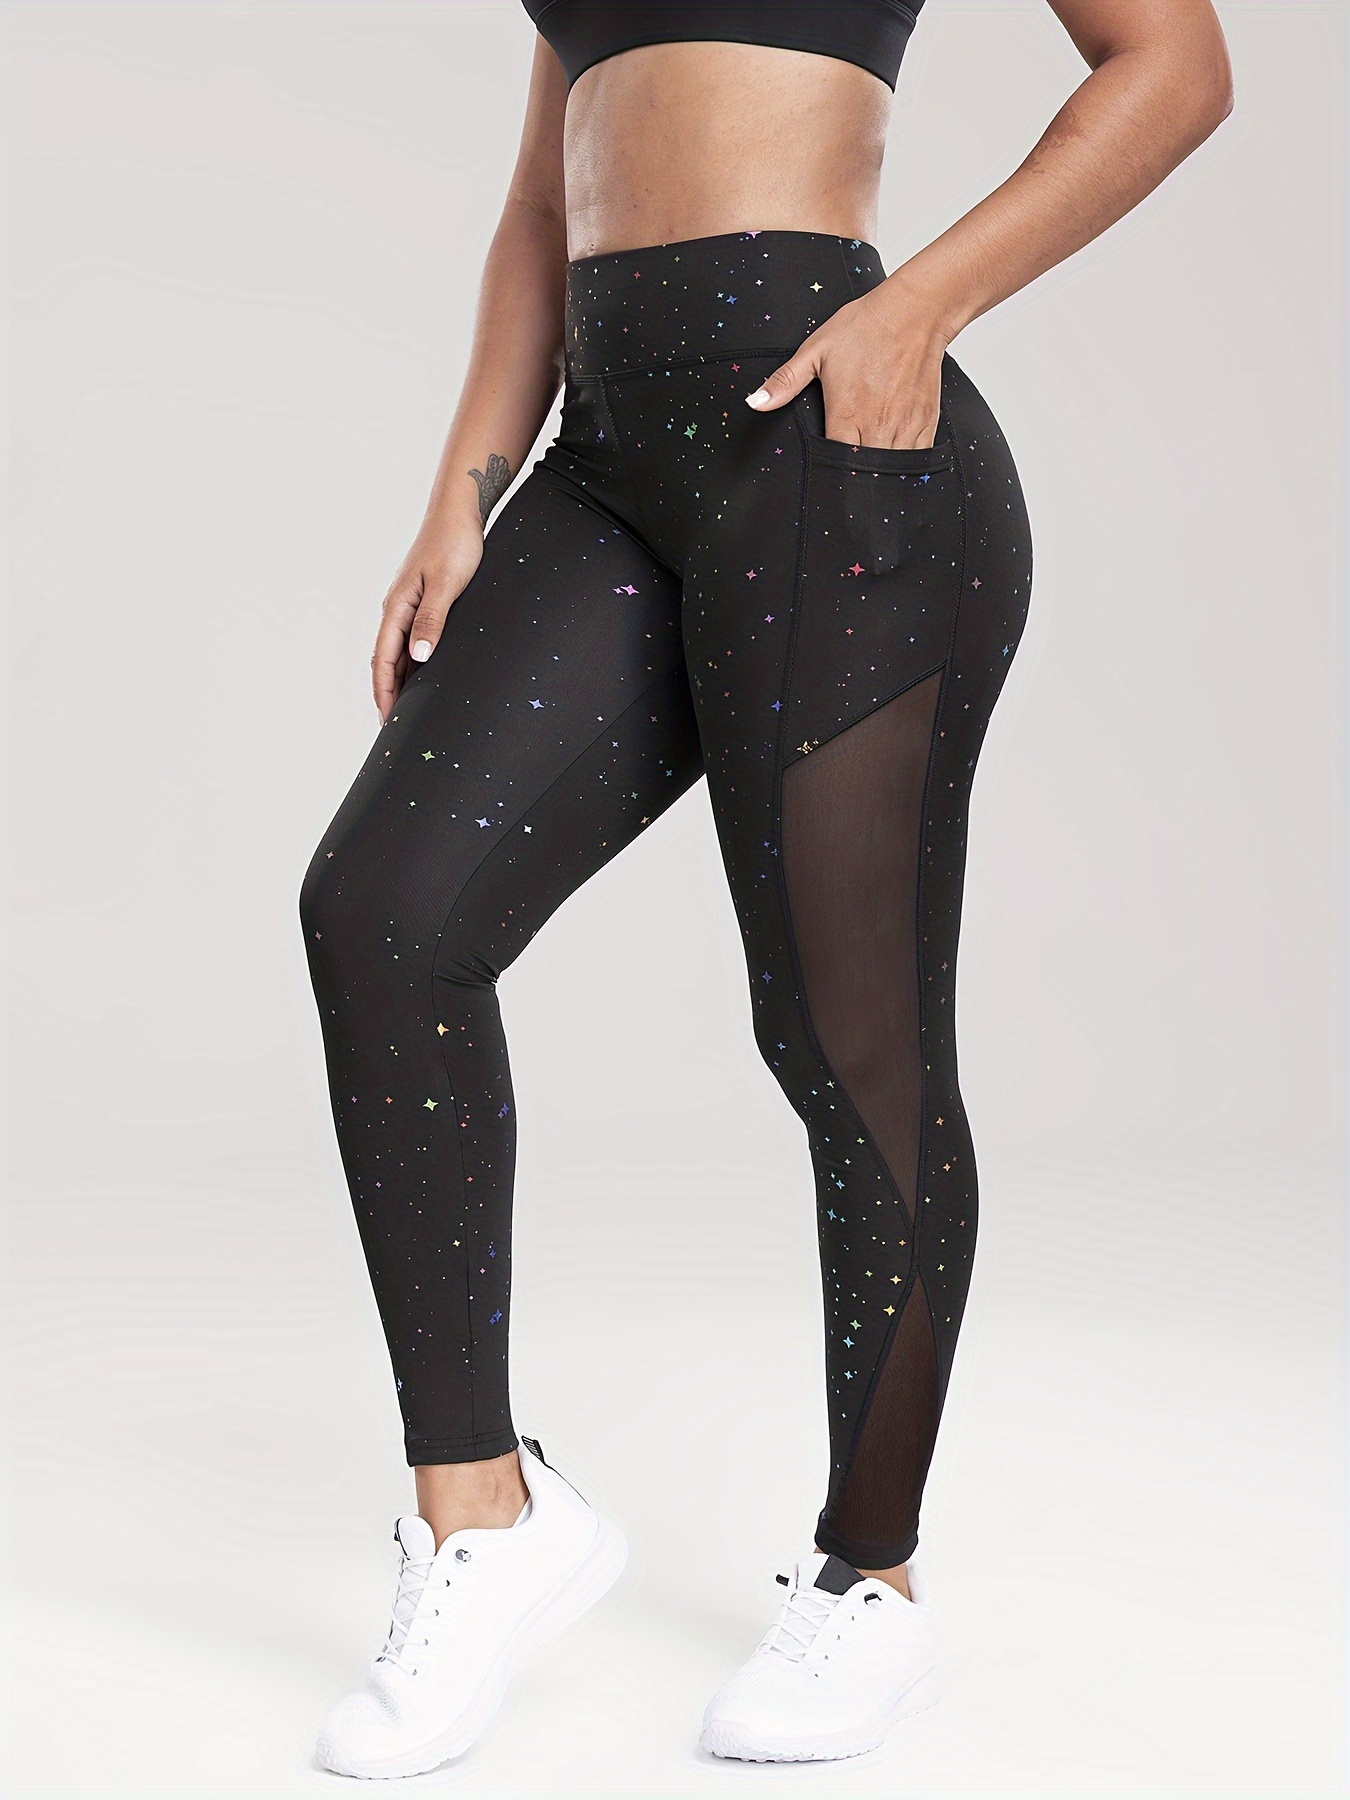 Star Print Mesh Contrast High Stretch Yoga Leggings With Side Pocket,  Fitness Sports Butt Lifting Pilates Tight Pants, Women's Activewear